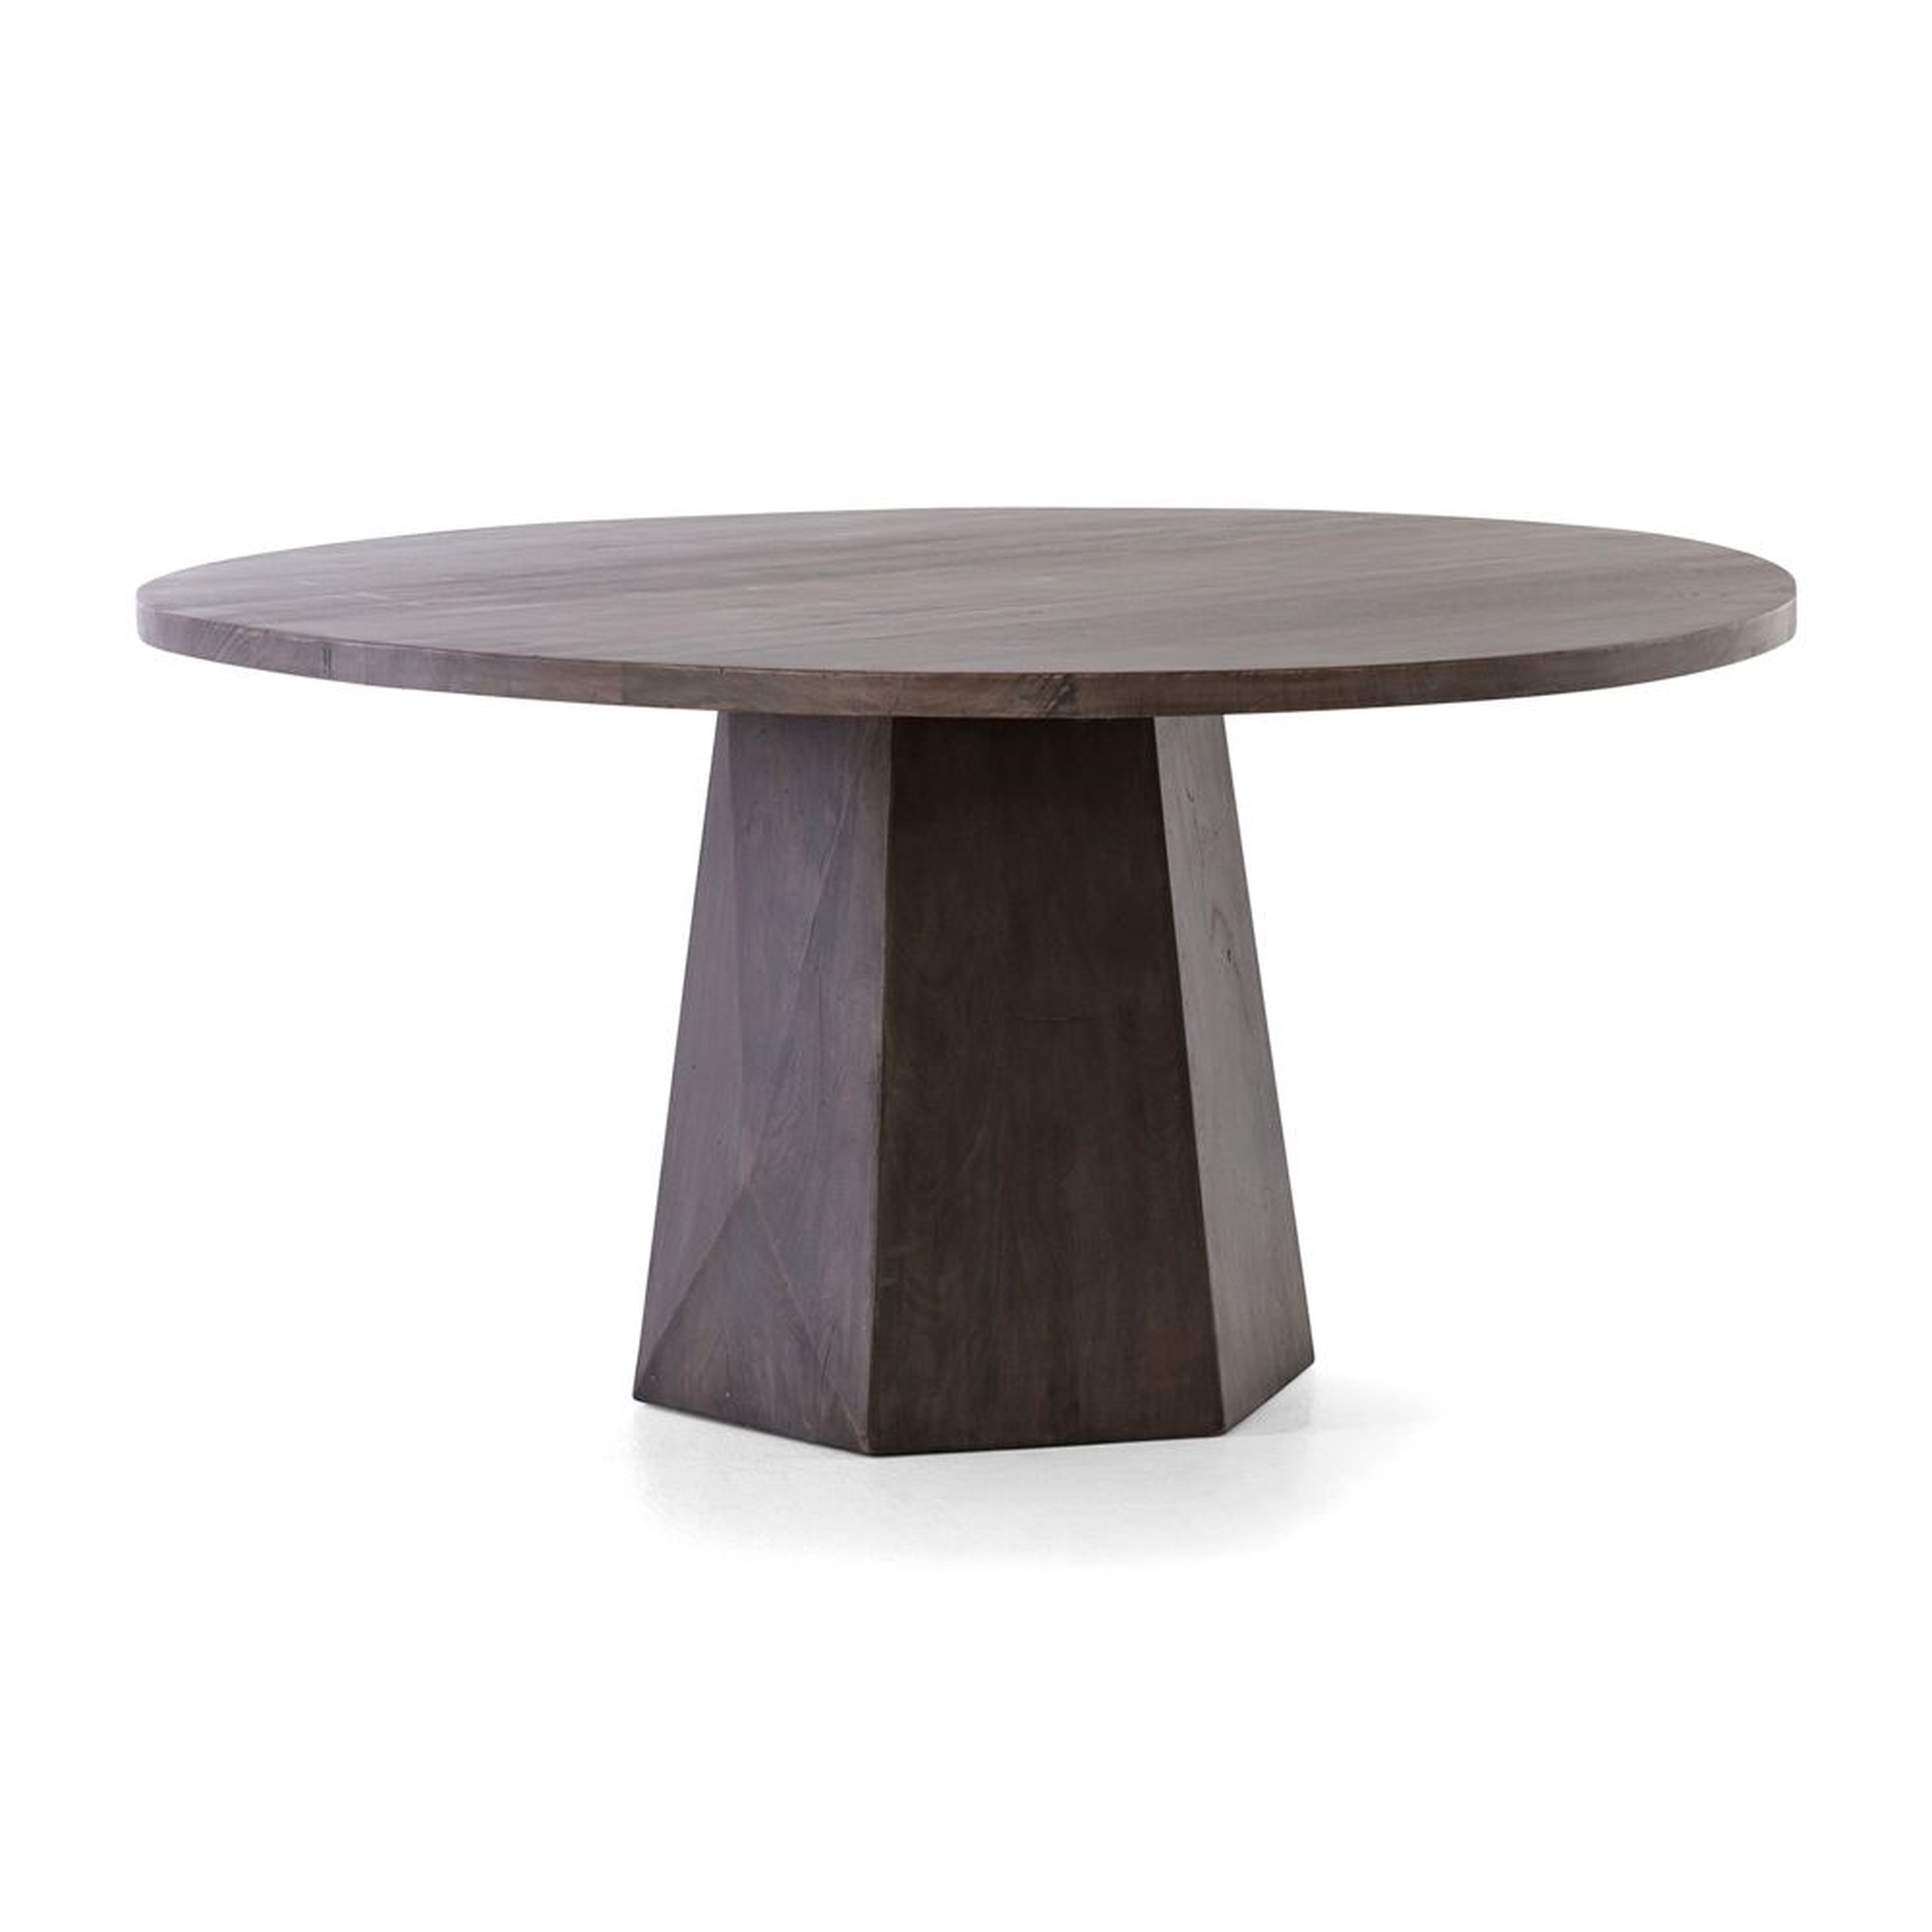 Kesling 60" Round  Wood Dining Table - Crate and Barrel